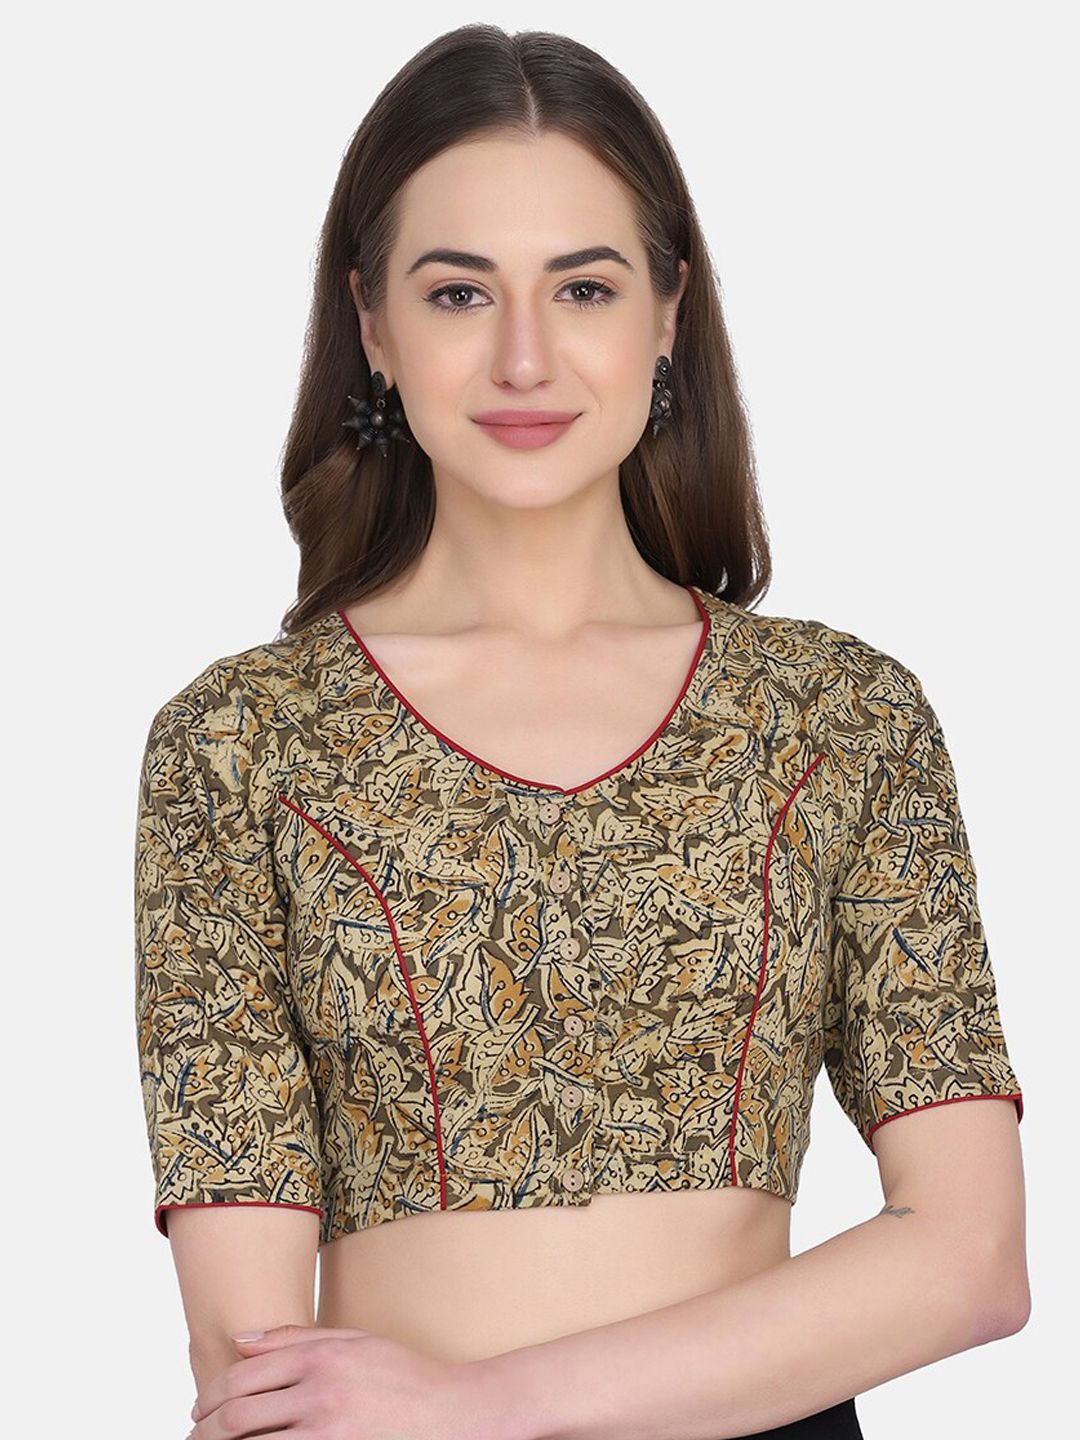 THE WEAVE TRAVELLER Women Camel Brown Hand Block Printed Cotton Saree Blouse Price in India